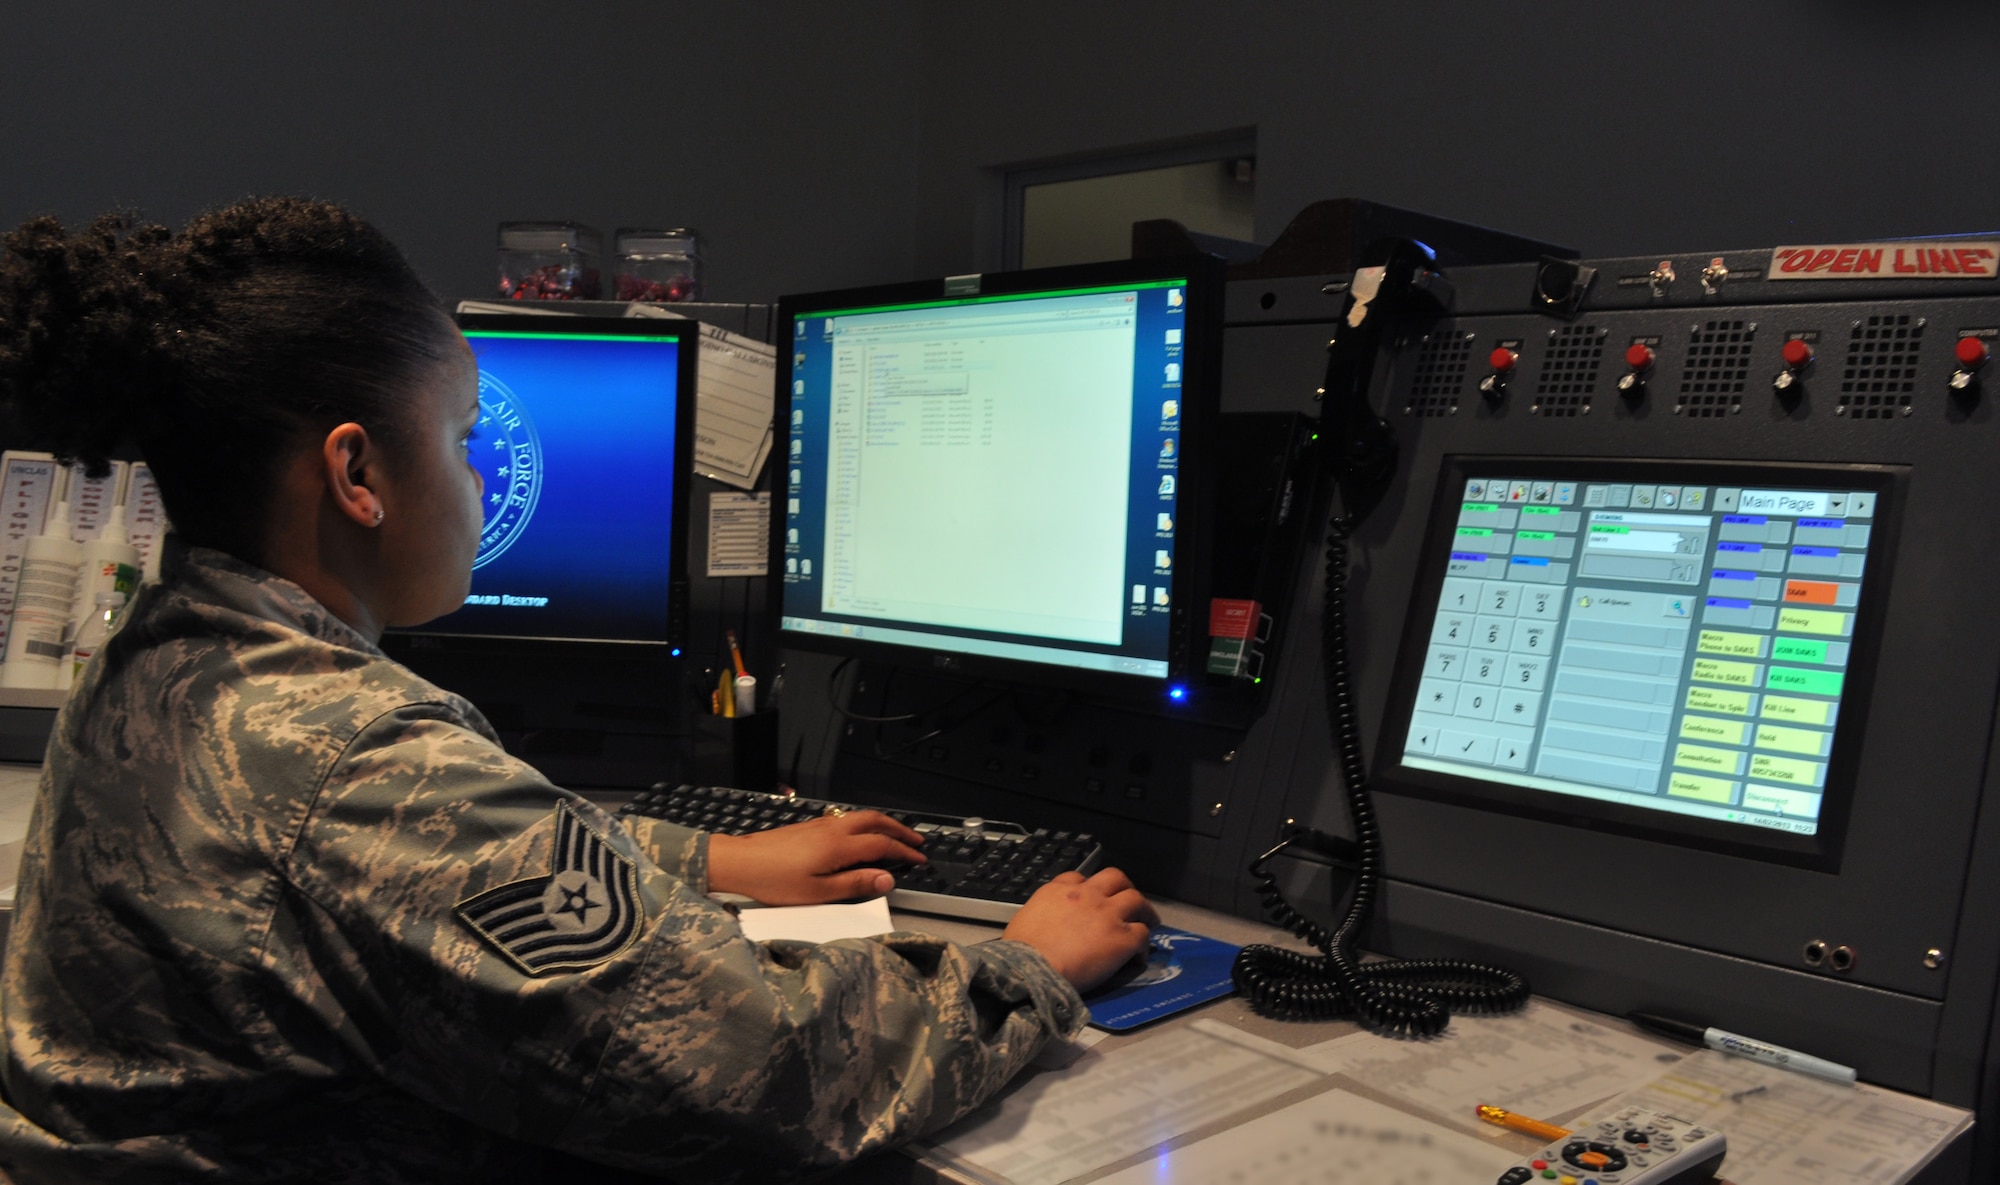 Tech. Sgt. Lakesha Bailey, 507th Air Refueling Wing command post controller and training manager works from her console here Feb 14. The 137th ARW, Oklahoma Air National Guard and 507th ARW’s “Sooner Control” command post is the only joint guard and reserve command post with a nuclear mission in the Air Force. (U.S. Air Force Photo by Senior Airman Mark Hybers)